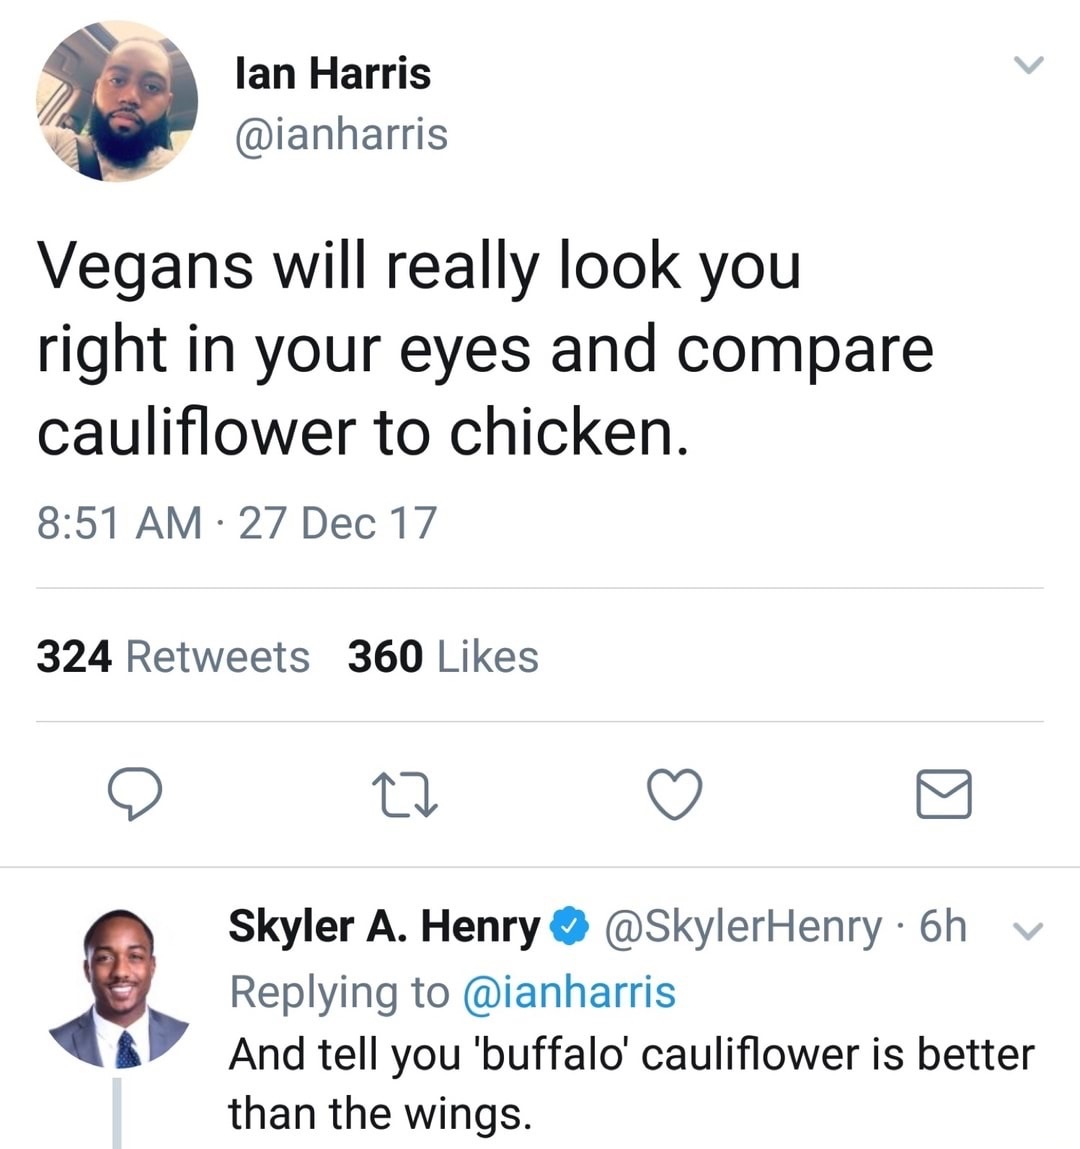 angle - lan Harris Vegans will really look you right in your eyes and compare cauliflower to chicken. 27 Dec 17 324 360 Skyler A. Henry 6h v And tell you 'buffalo' cauliflower is better than the wings.